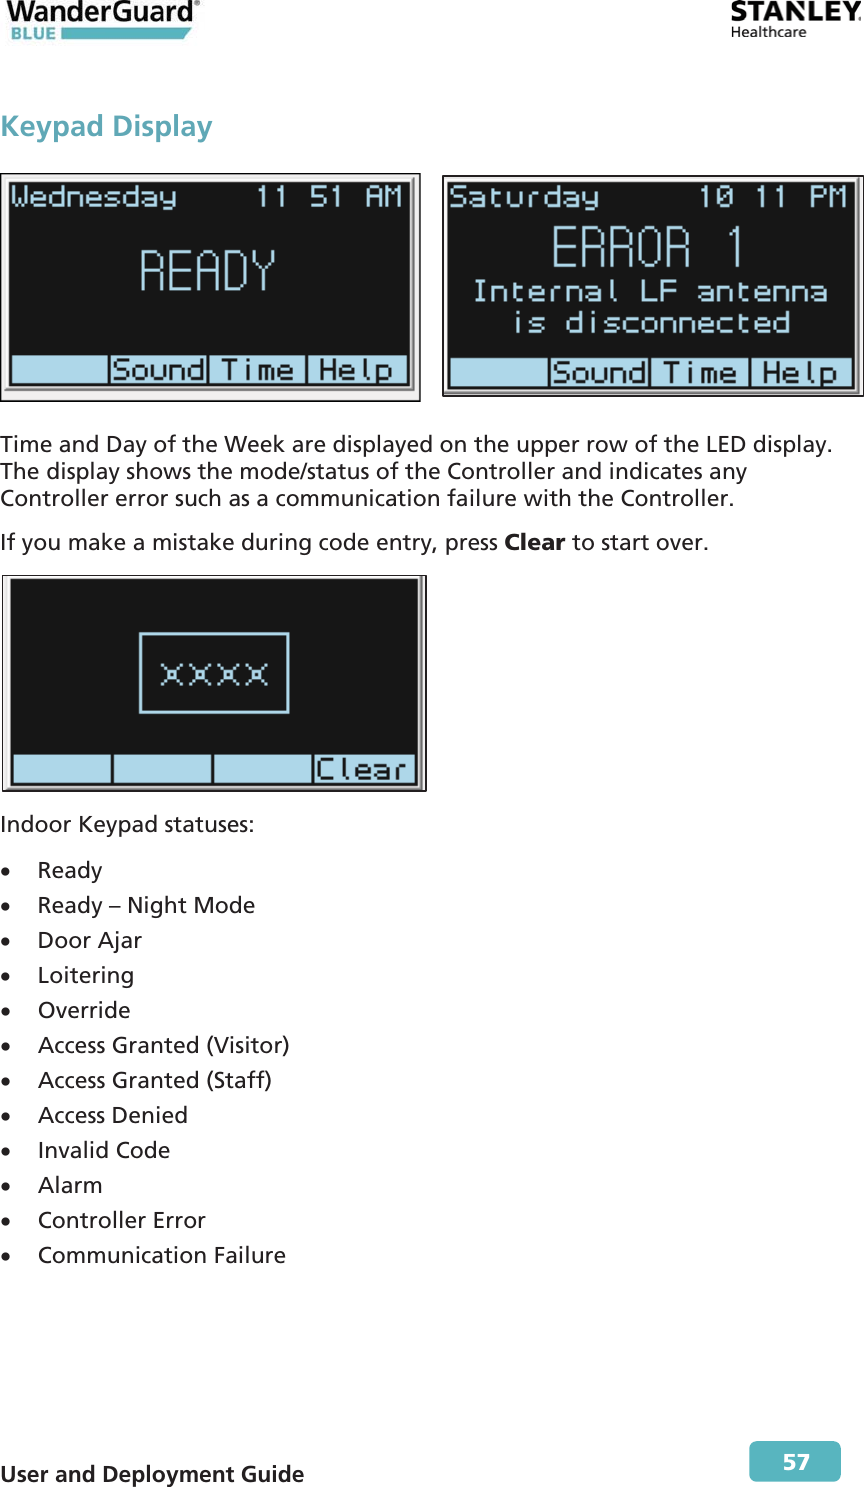  User and Deployment Guide        57 Keypad Display   Time and Day of the Week are displayed on the upper row of the LED display. The display shows the mode/status of the Controller and indicates any Controller error such as a communication failure with the Controller. If you make a mistake during code entry, press Clear to start over.  Indoor Keypad statuses: x Ready x Ready – Night Mode x Door Ajar x Loitering x Override x Access Granted (Visitor) x Access Granted (Staff) x Access Denied x Invalid Code x Alarm x Controller Error x Communication Failure 